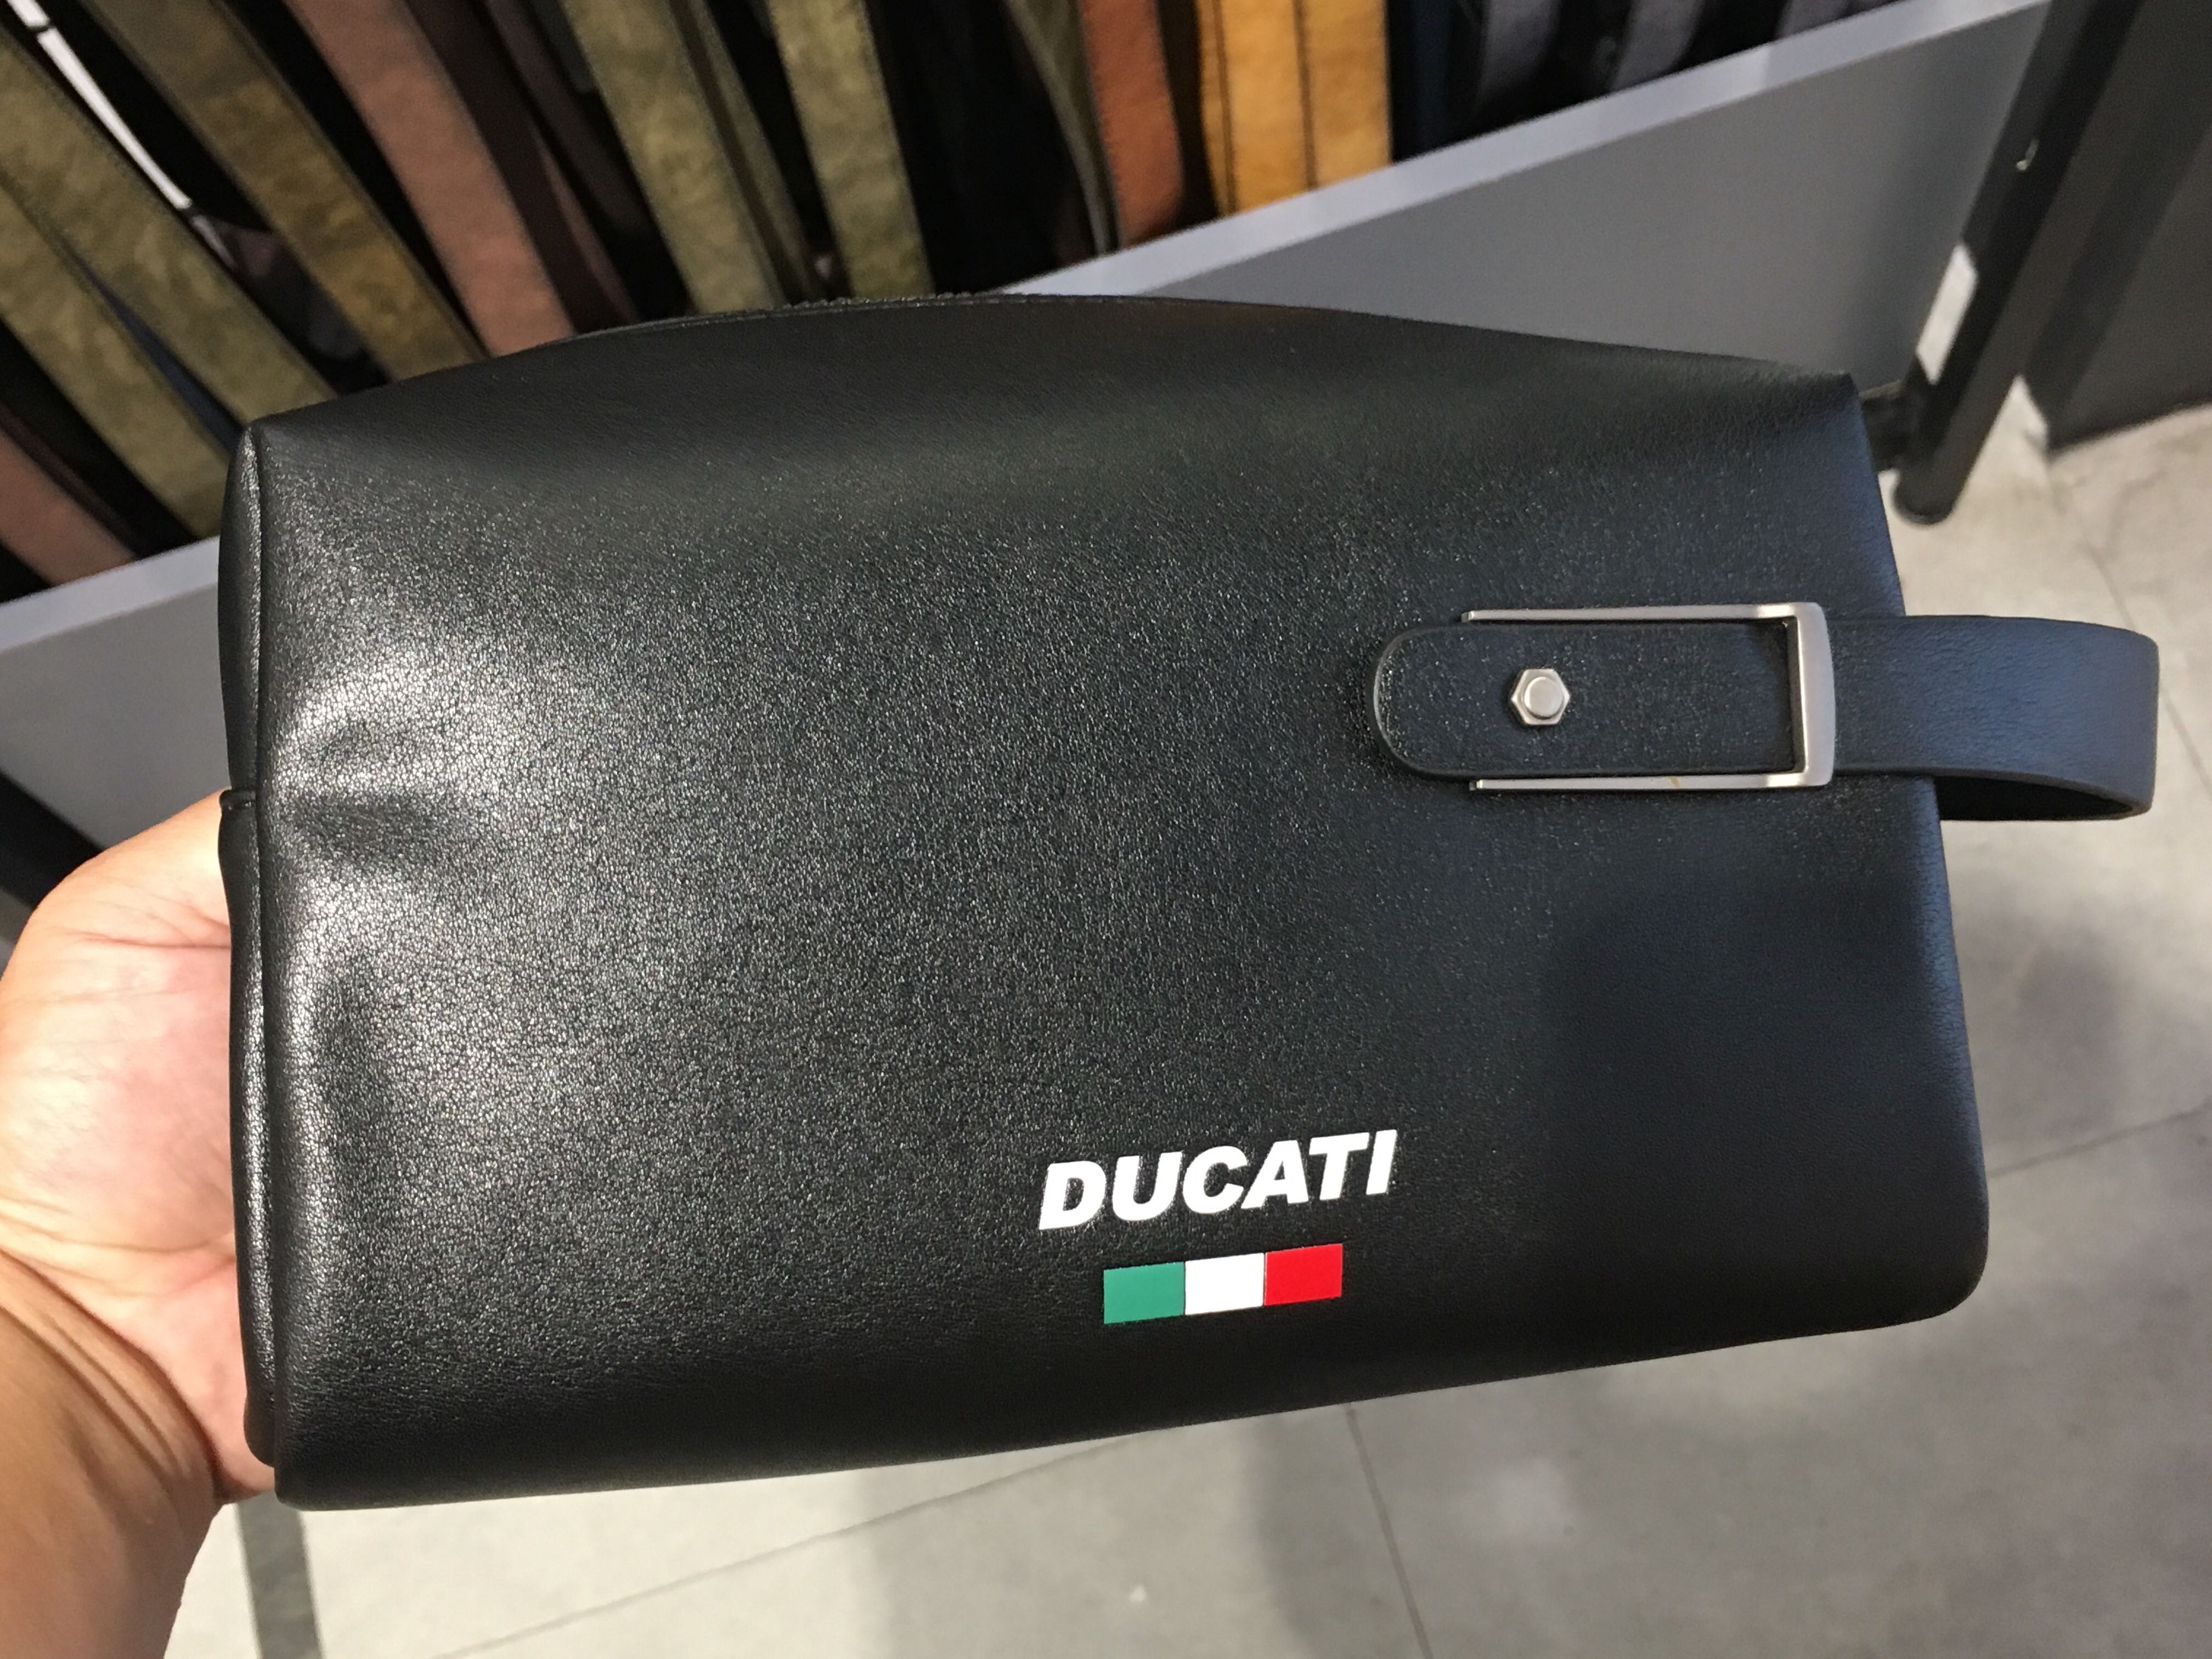 Ducati Pouch Bag  Malaysia Motorsports Merchandise  Facebook